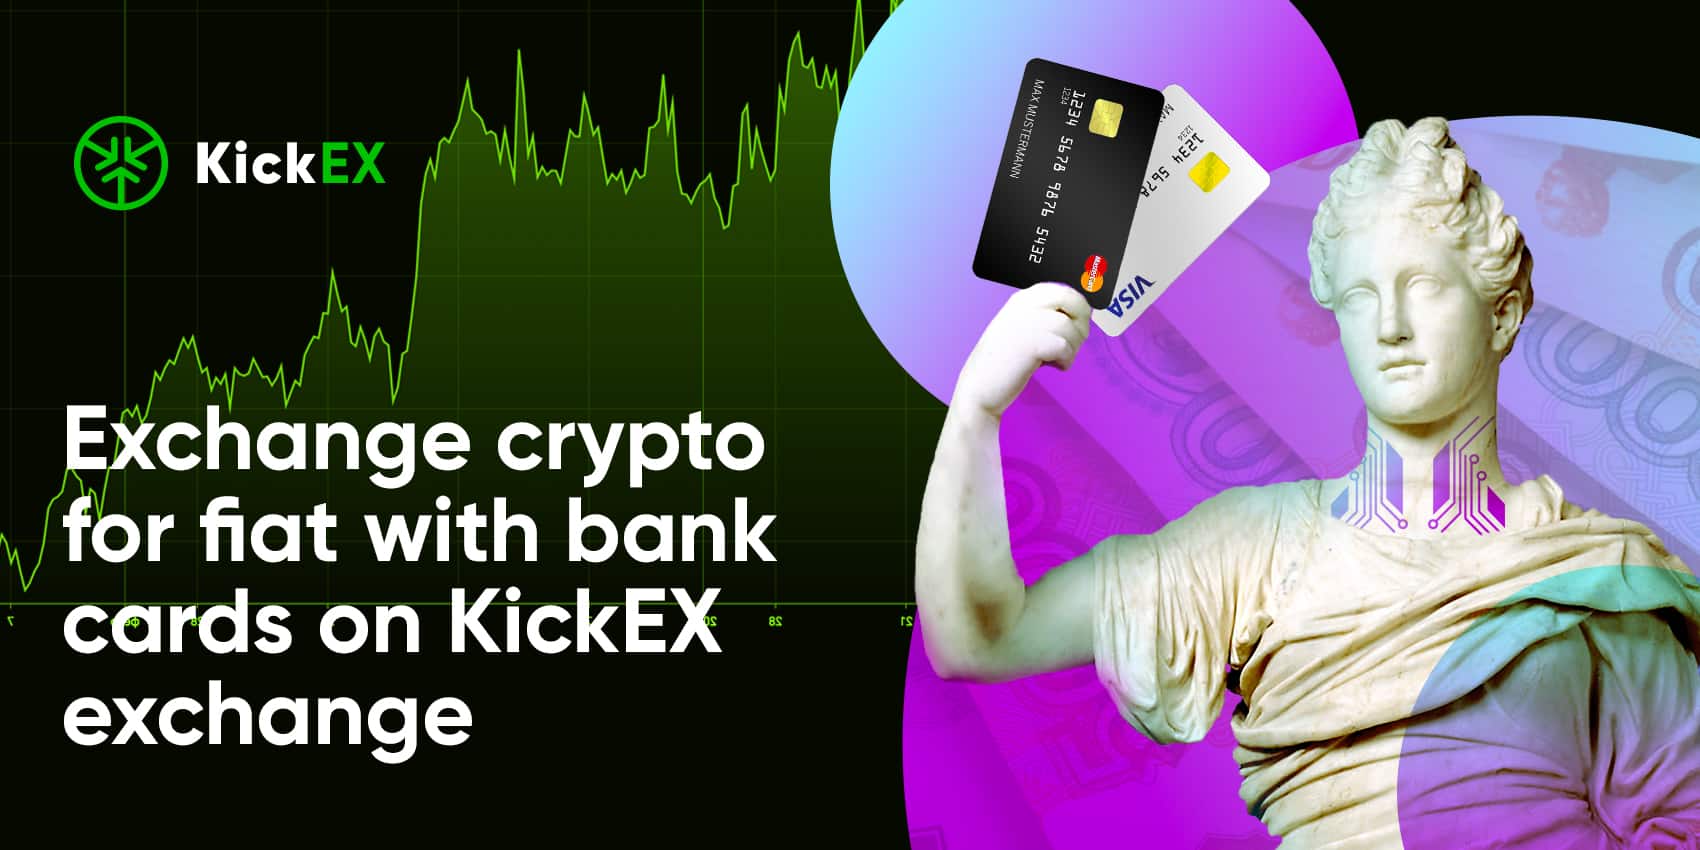 KickEX Adds Buying Crypto For Fiat With Bank Cards - Daily ...